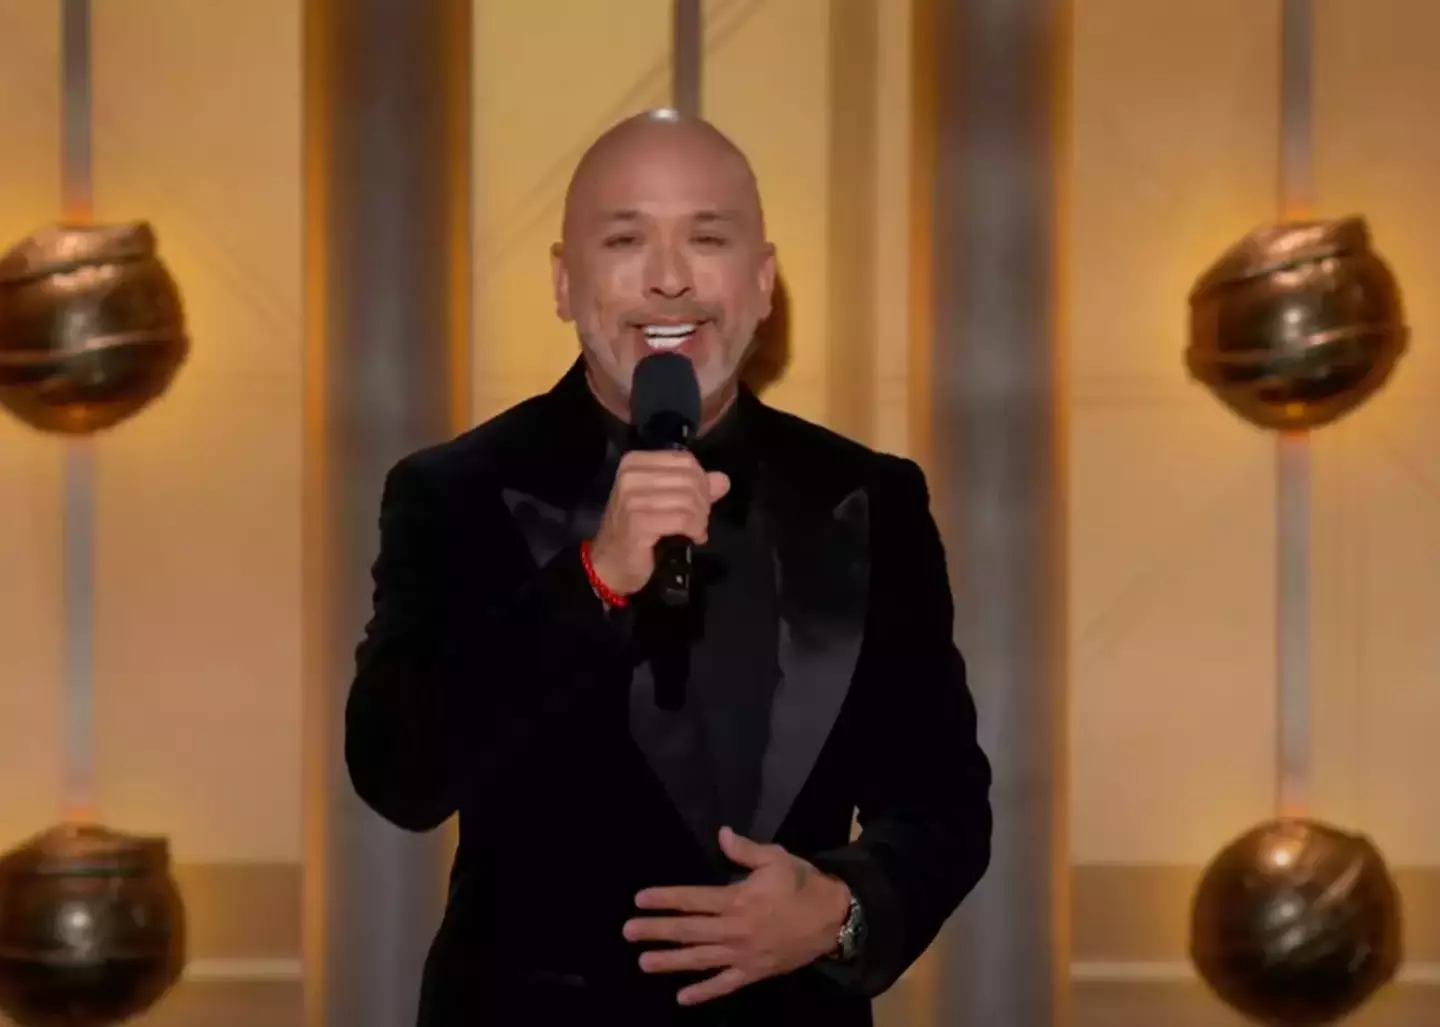 Jo Koy's joke about Barbie wasn't received well by both the audience and viewers at home.